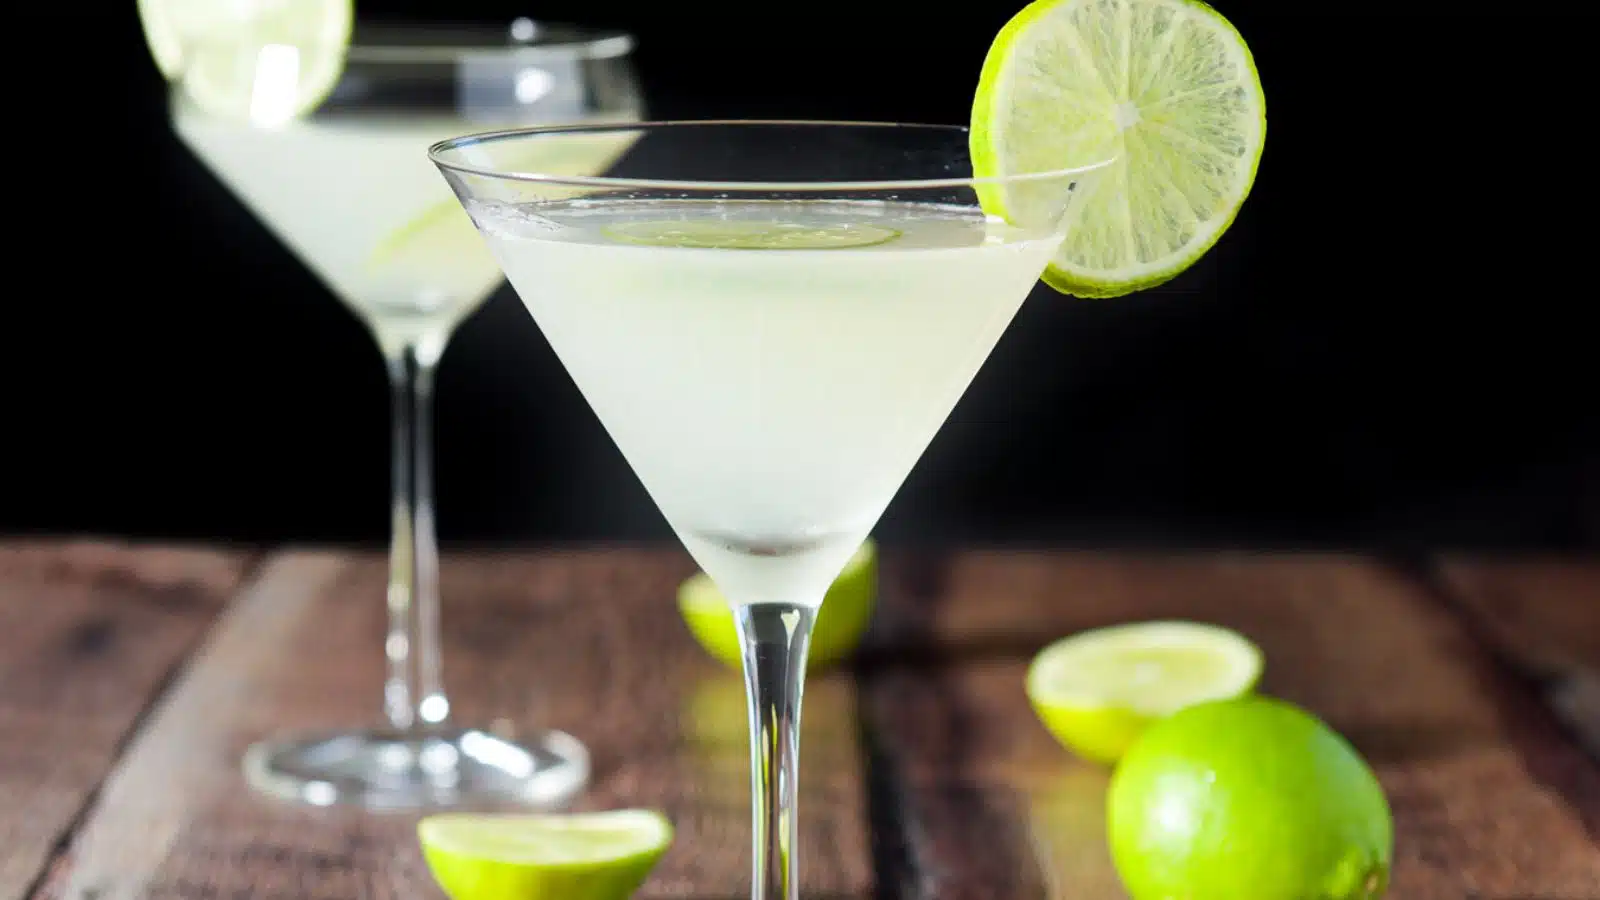 Two martini glasses filled with the lime drink with lime wheels on the rim and limes on the table